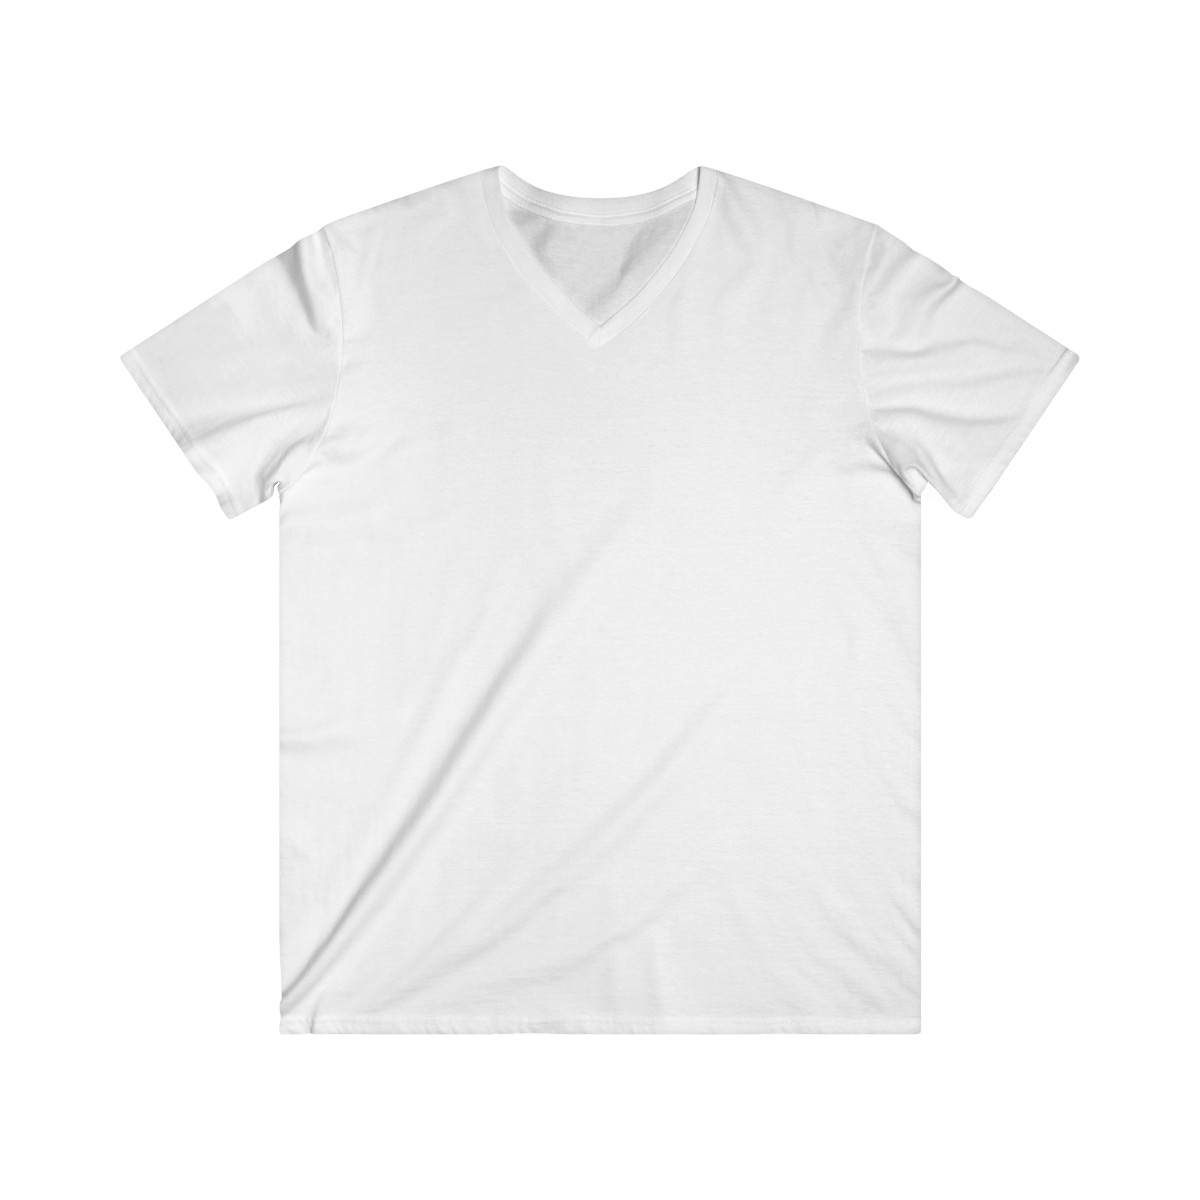 𝑷𝒓𝒊𝒏𝒄𝒆 𝑻𝒓𝒊𝒃𝒖𝒕𝒆 𝑭𝒊𝒏𝒂𝒍𝒆 Men's Fitted V-Neck Tee product thumbnail image